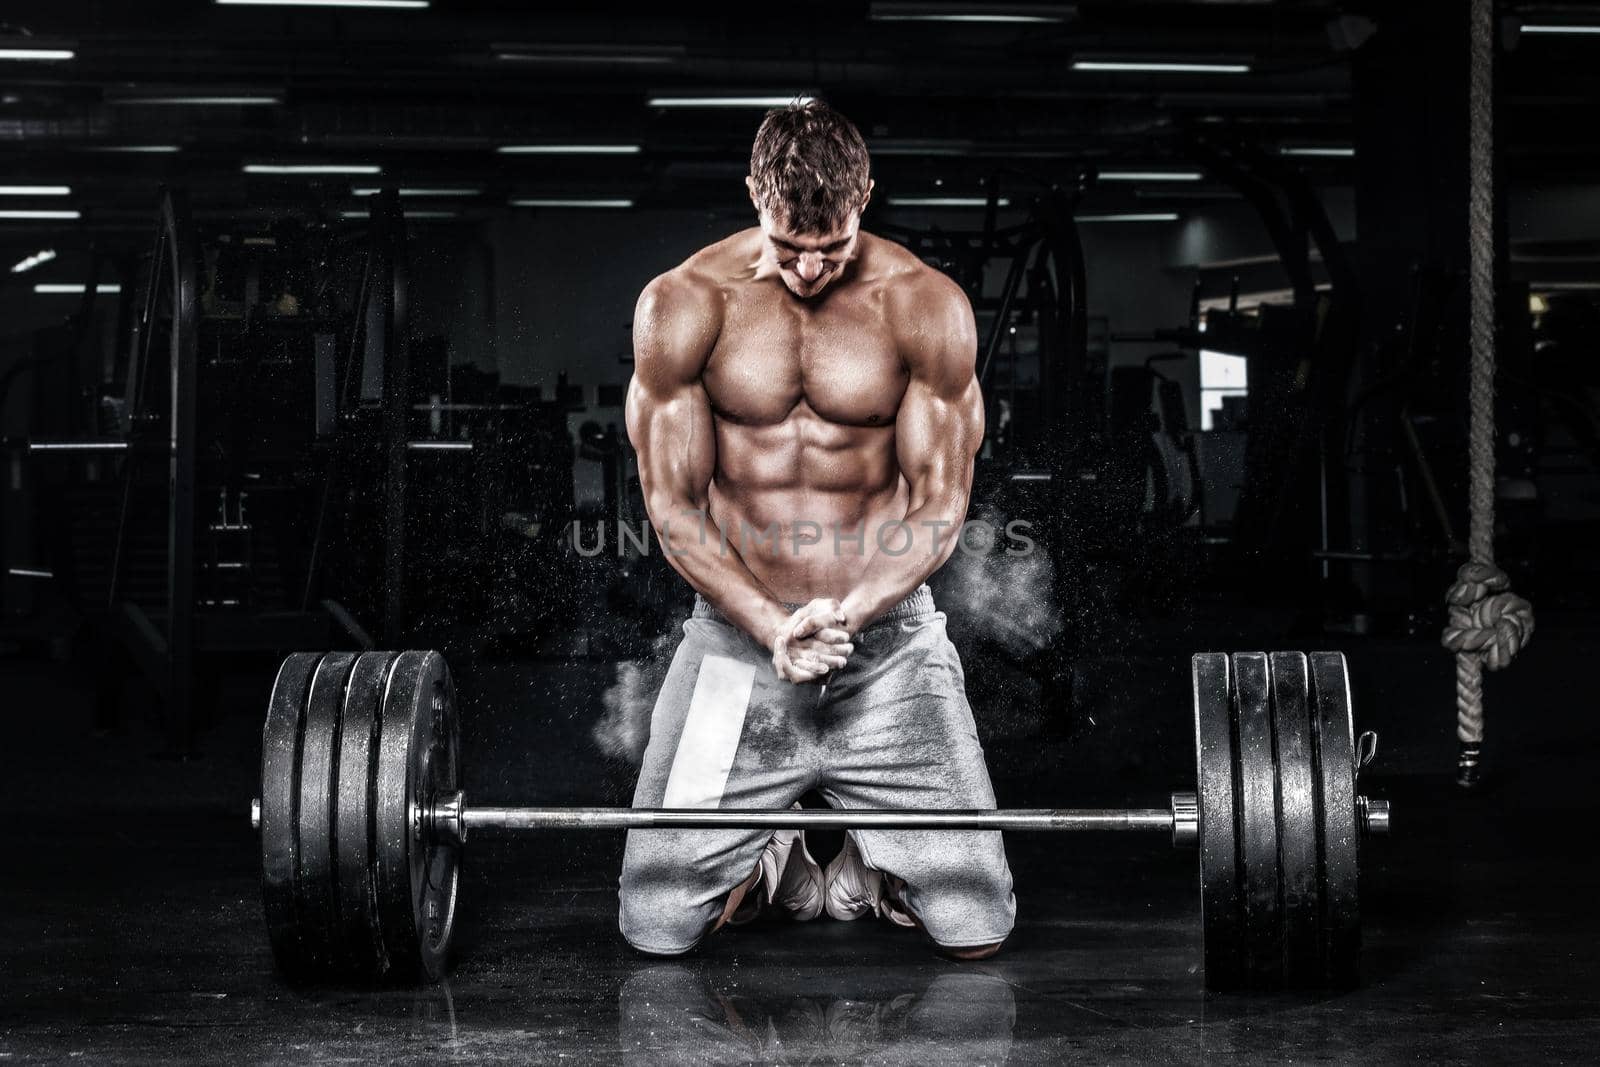 Athletic shirtless young sports man - fitness model with barbell in gym.